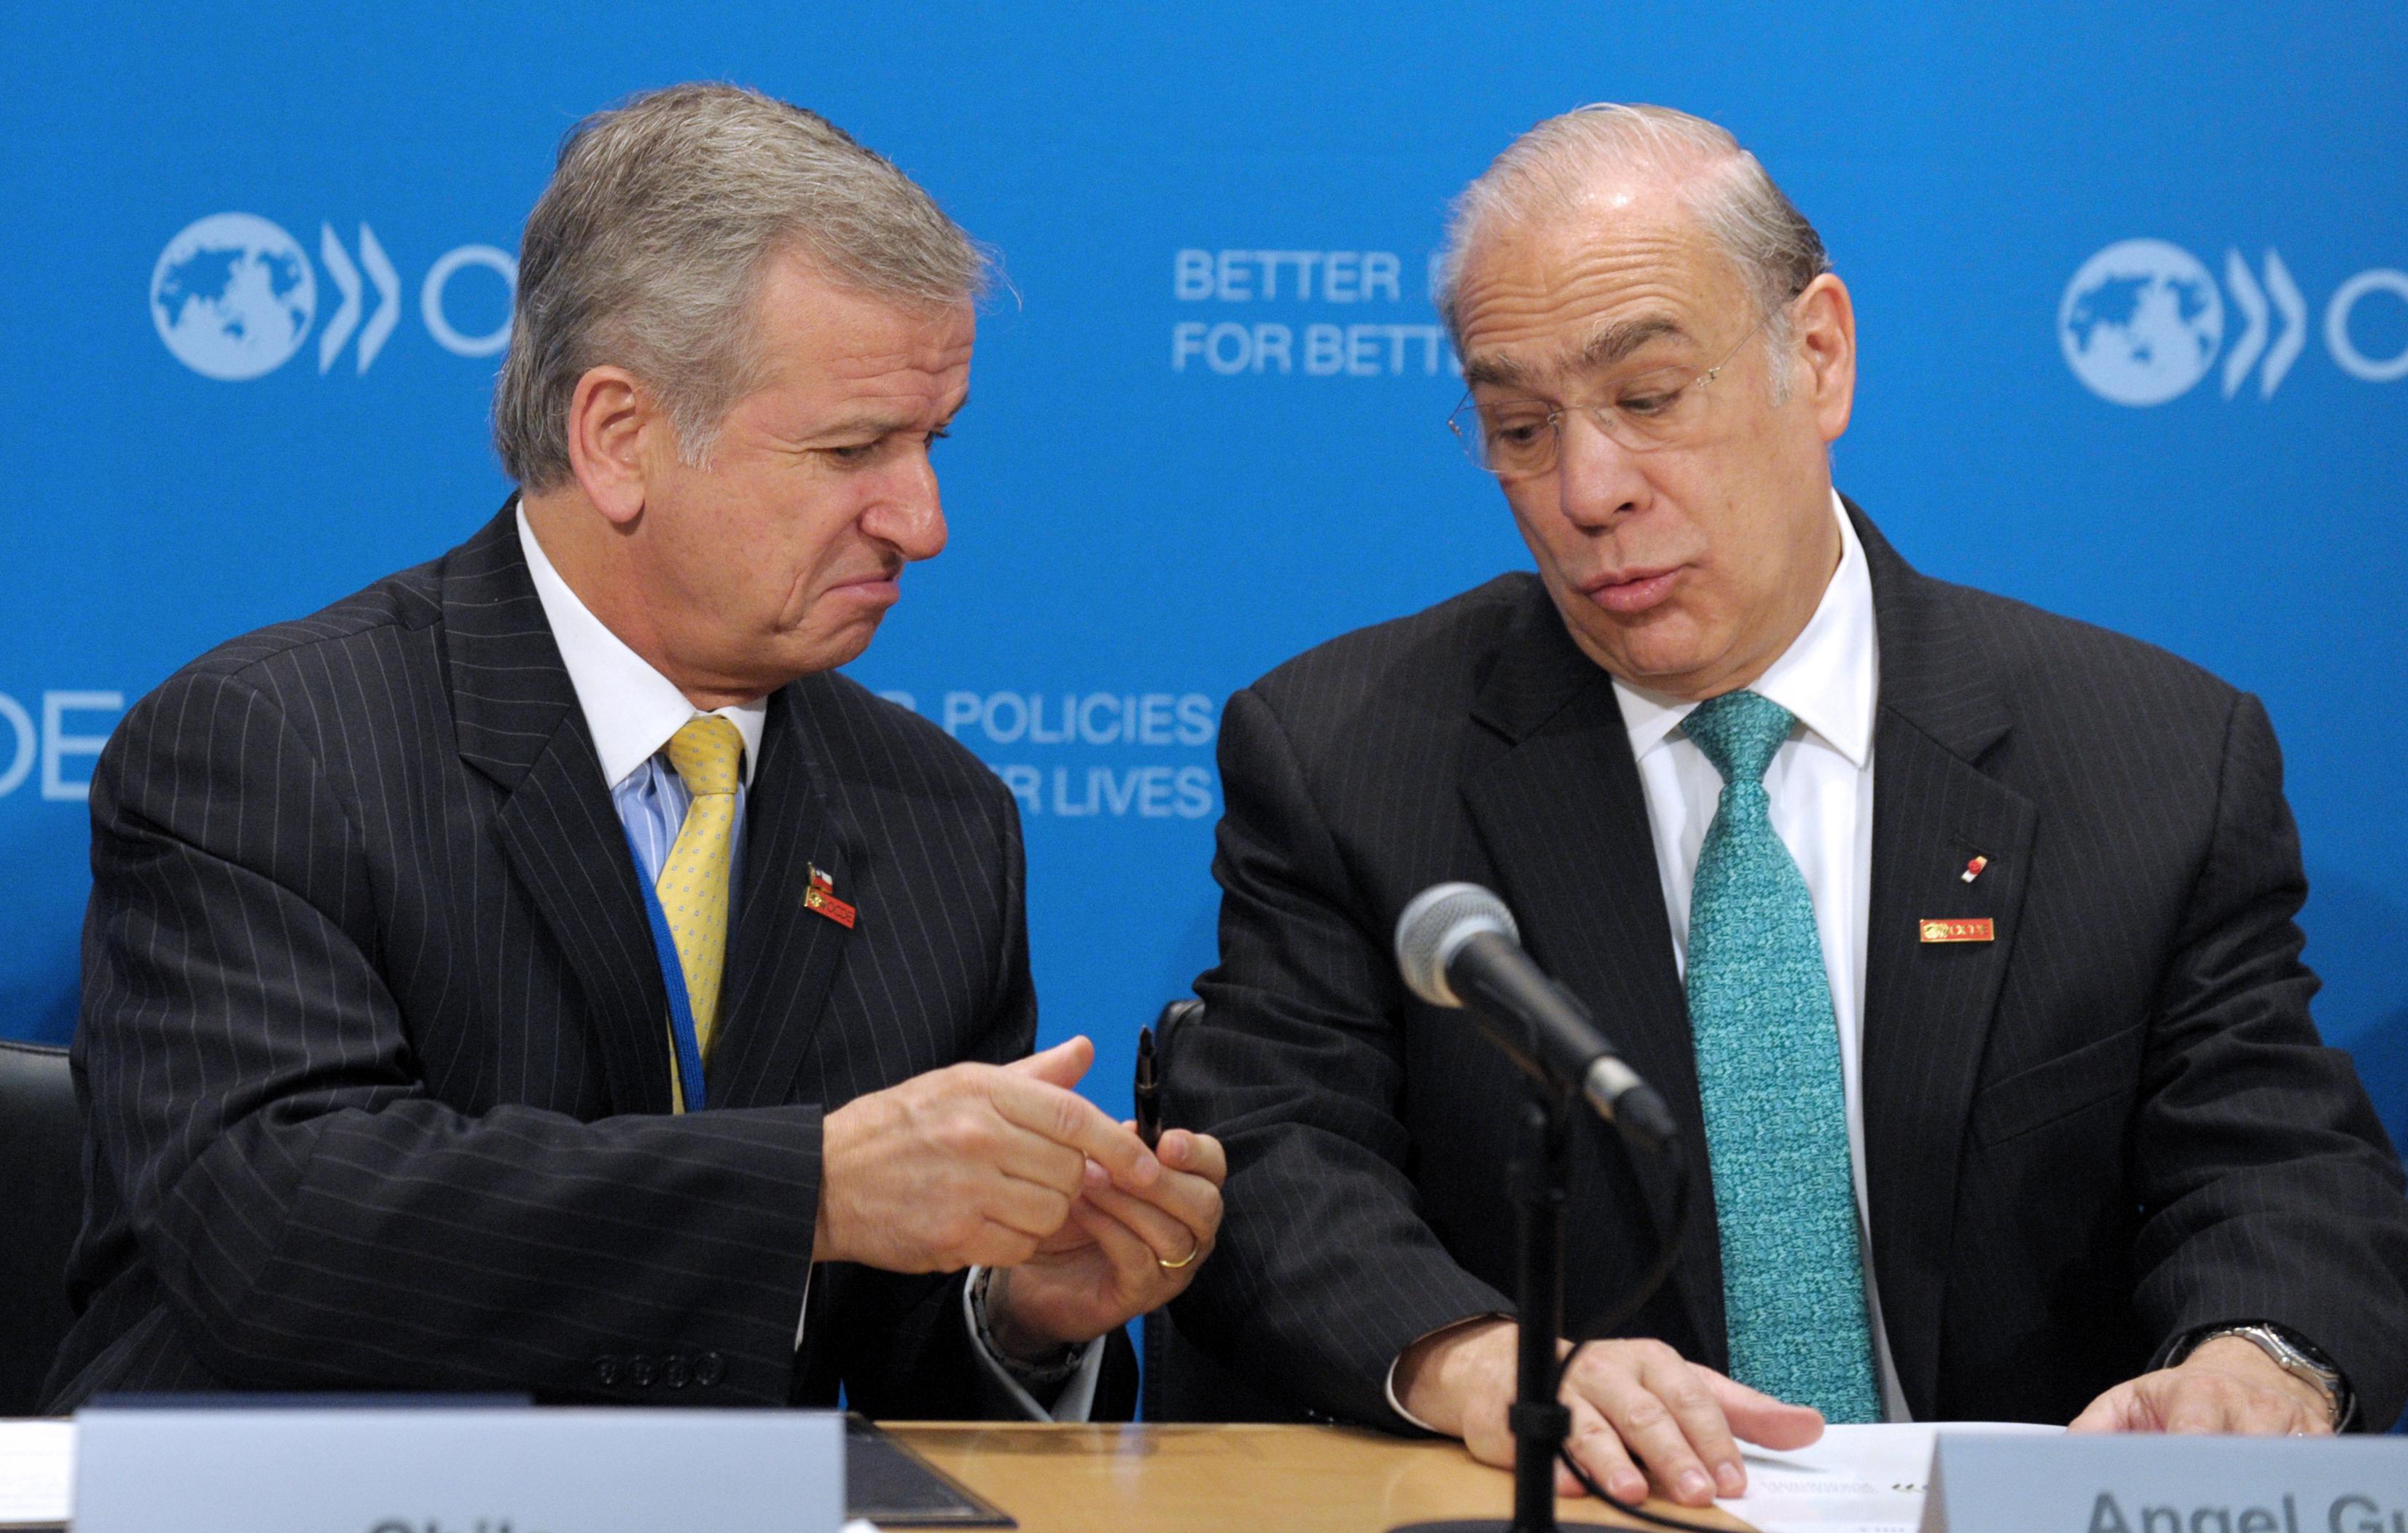 Chile Minister of Finance Felipe Larrain and OECD General Secretary Angel Gurria joke about the pen before the signing by Chile of a letter of intention to sign an OECD multilateral convention on mutual administrative assistance in tax matters during a signing ceremony at the OECD headquarters in Paris on May 29, 2013.